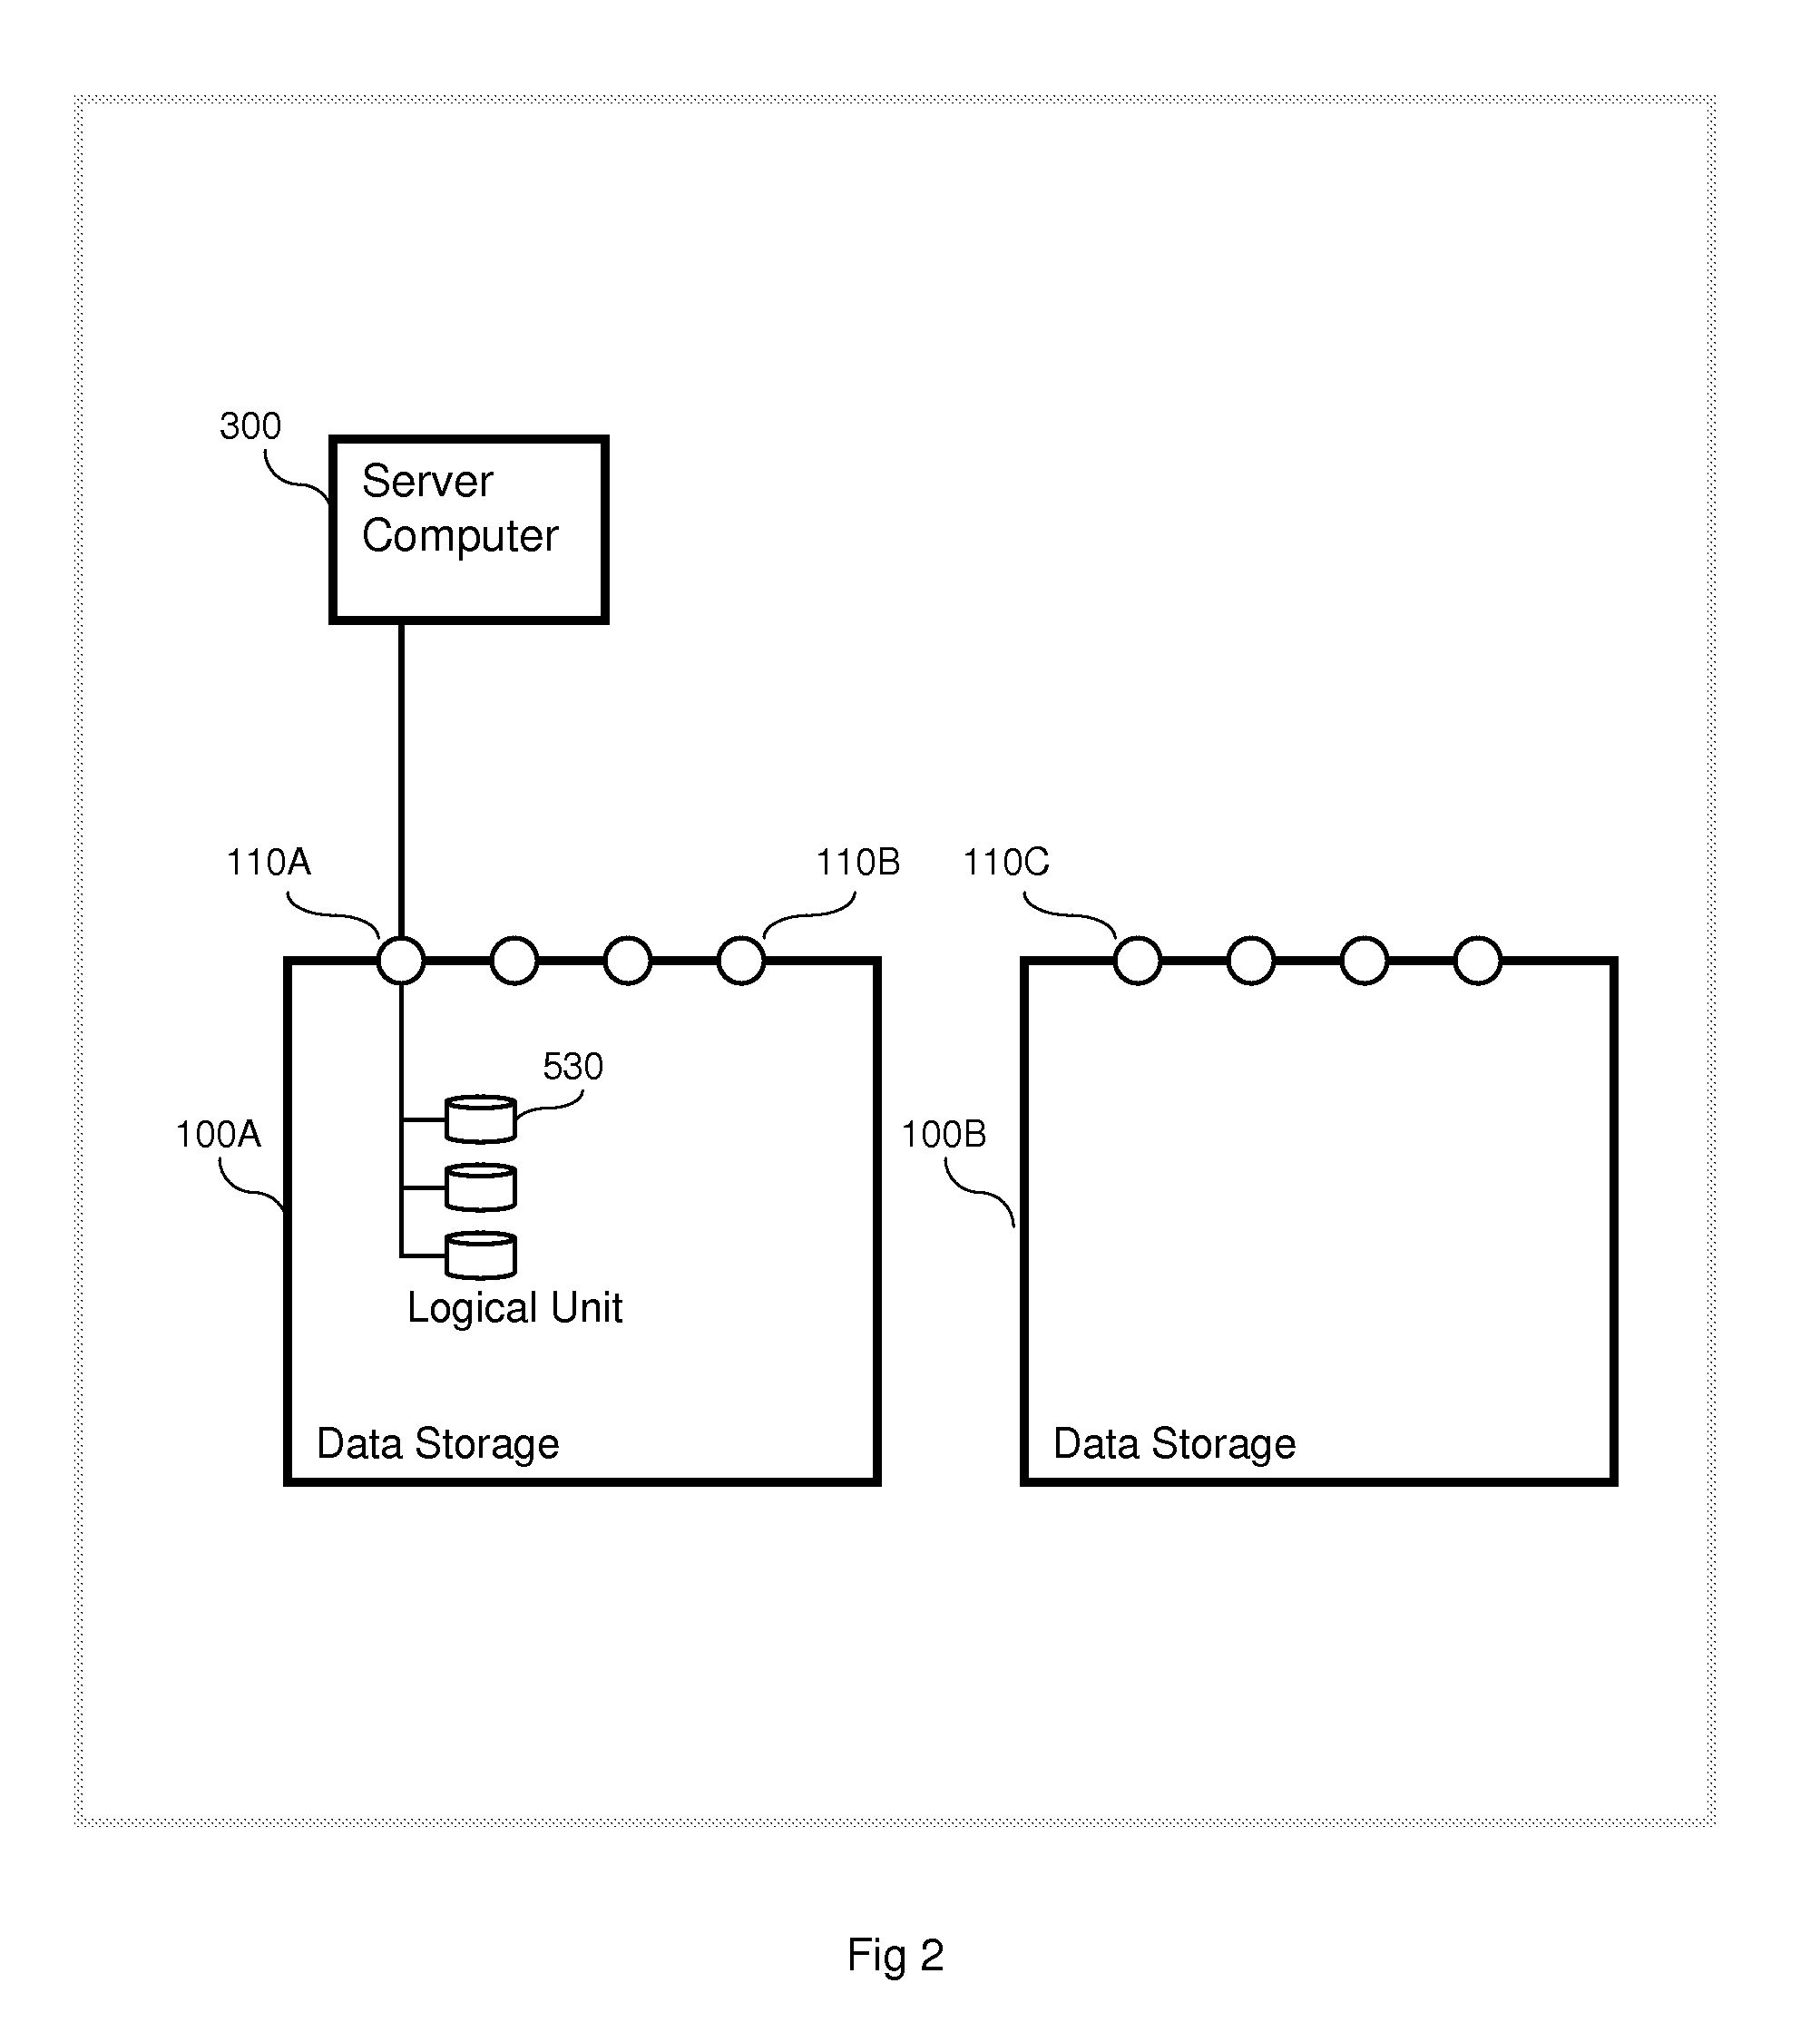 Multipath switching over multiple storage systems